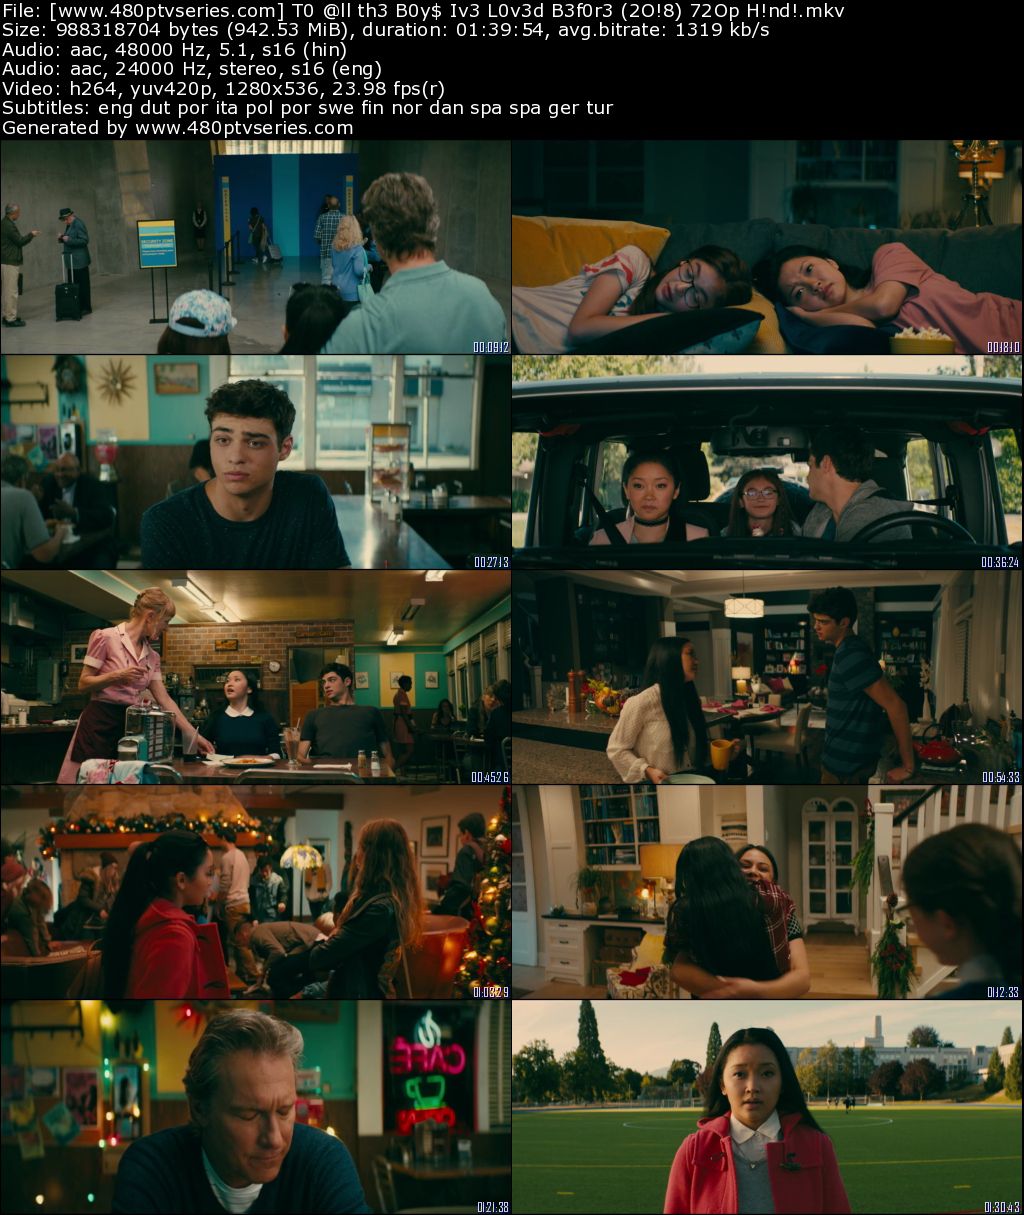 Download To All the Boys I've Loved Before (2018) 950MB Full Hindi Dual Audio Movie Download 720p Web-DL Free Watch Online Full Movie Download Worldfree4u 9xmovies